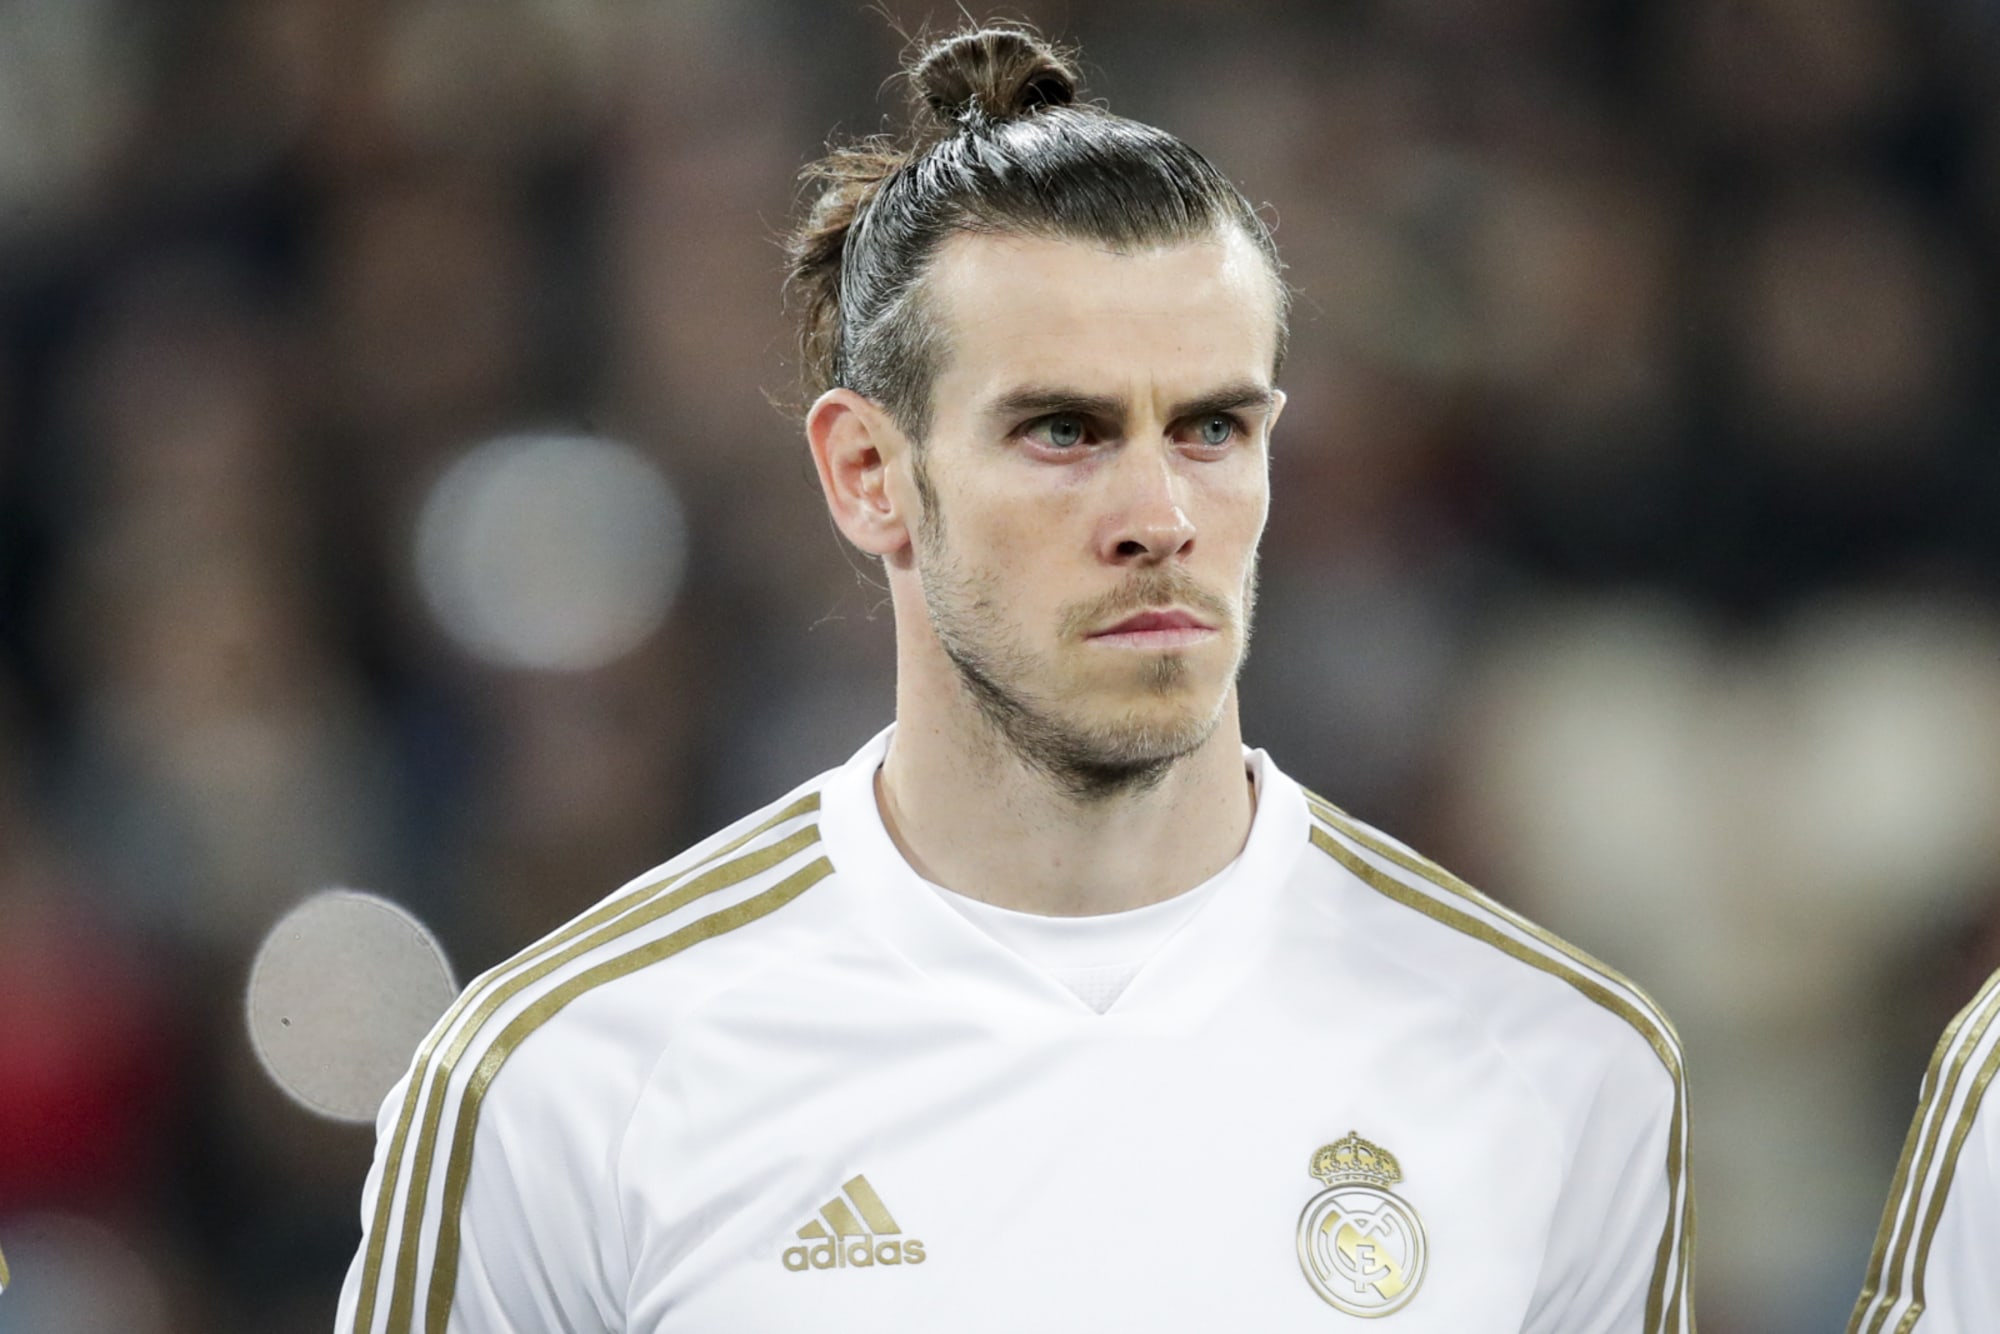 Real Madrid Gareth Bale Is Right About The Problem With Whistling Players